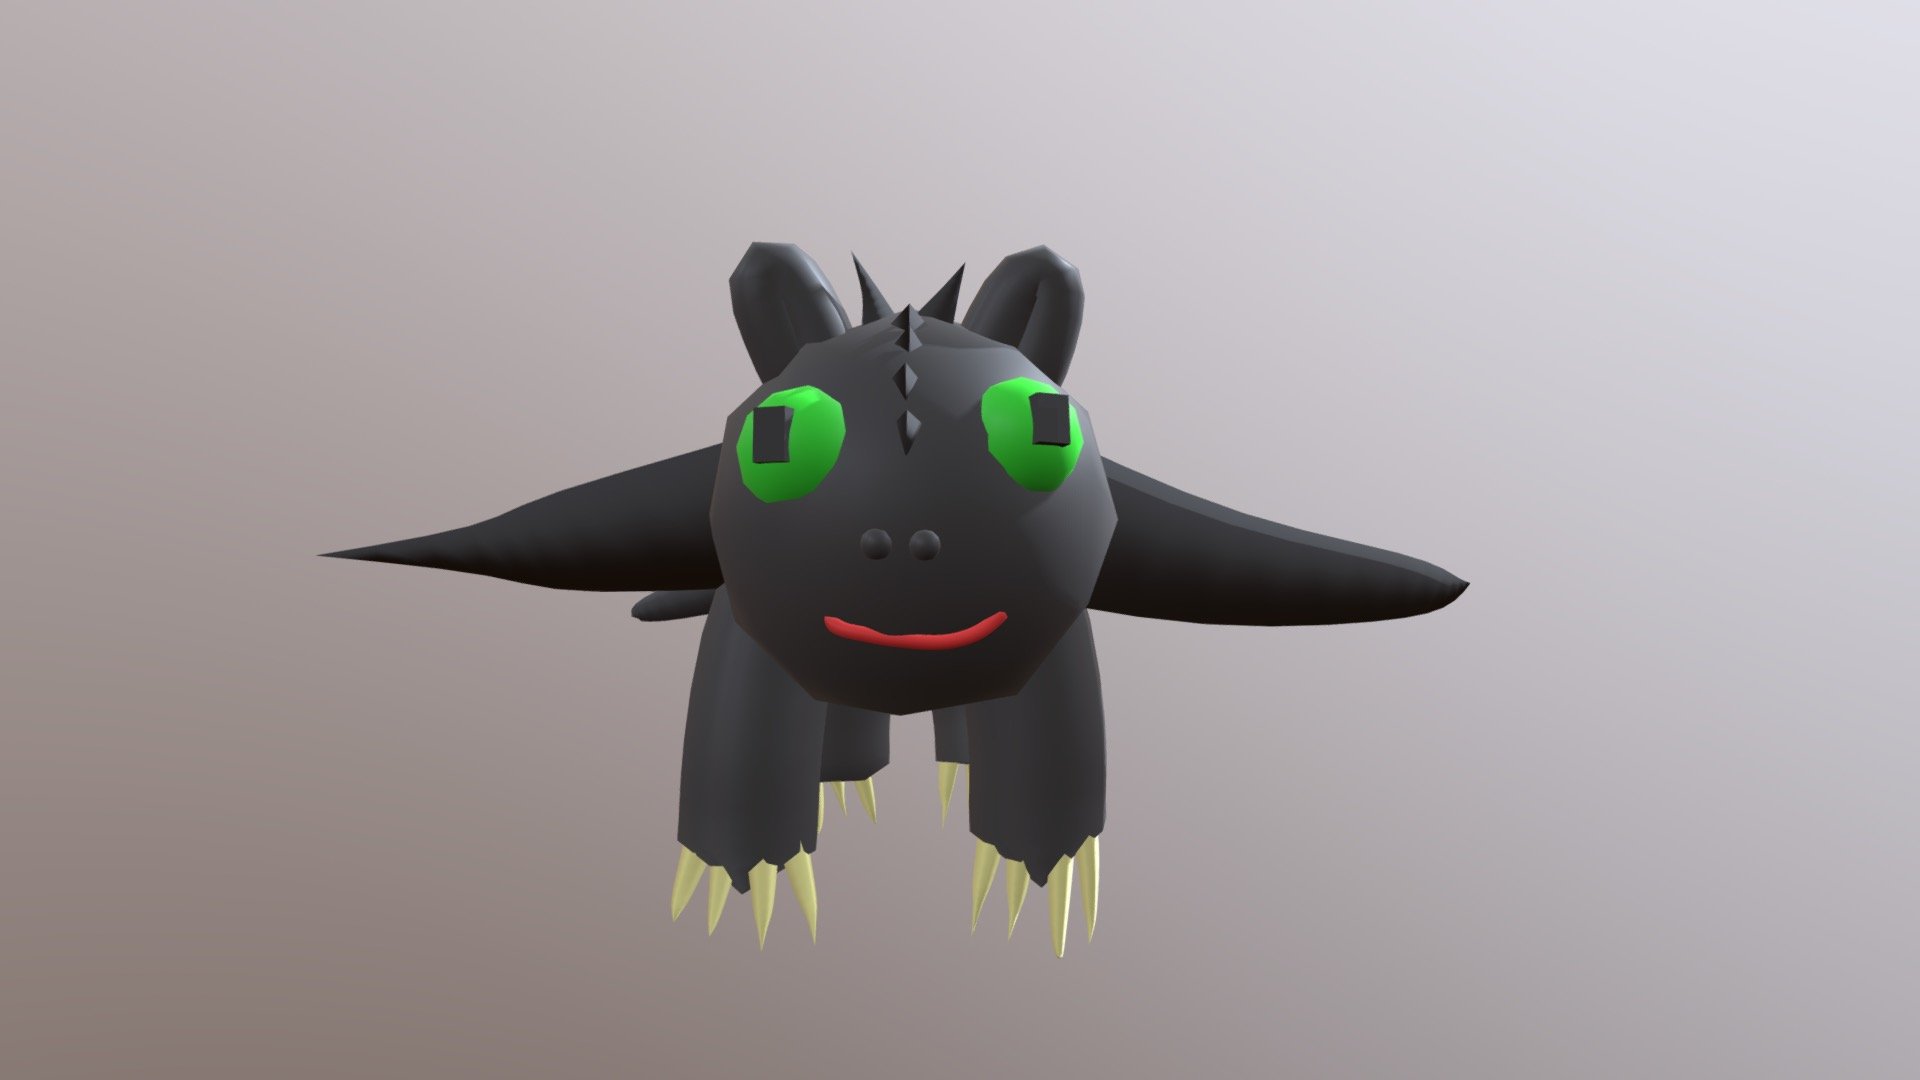 Toothless from How to Train Your Dragon